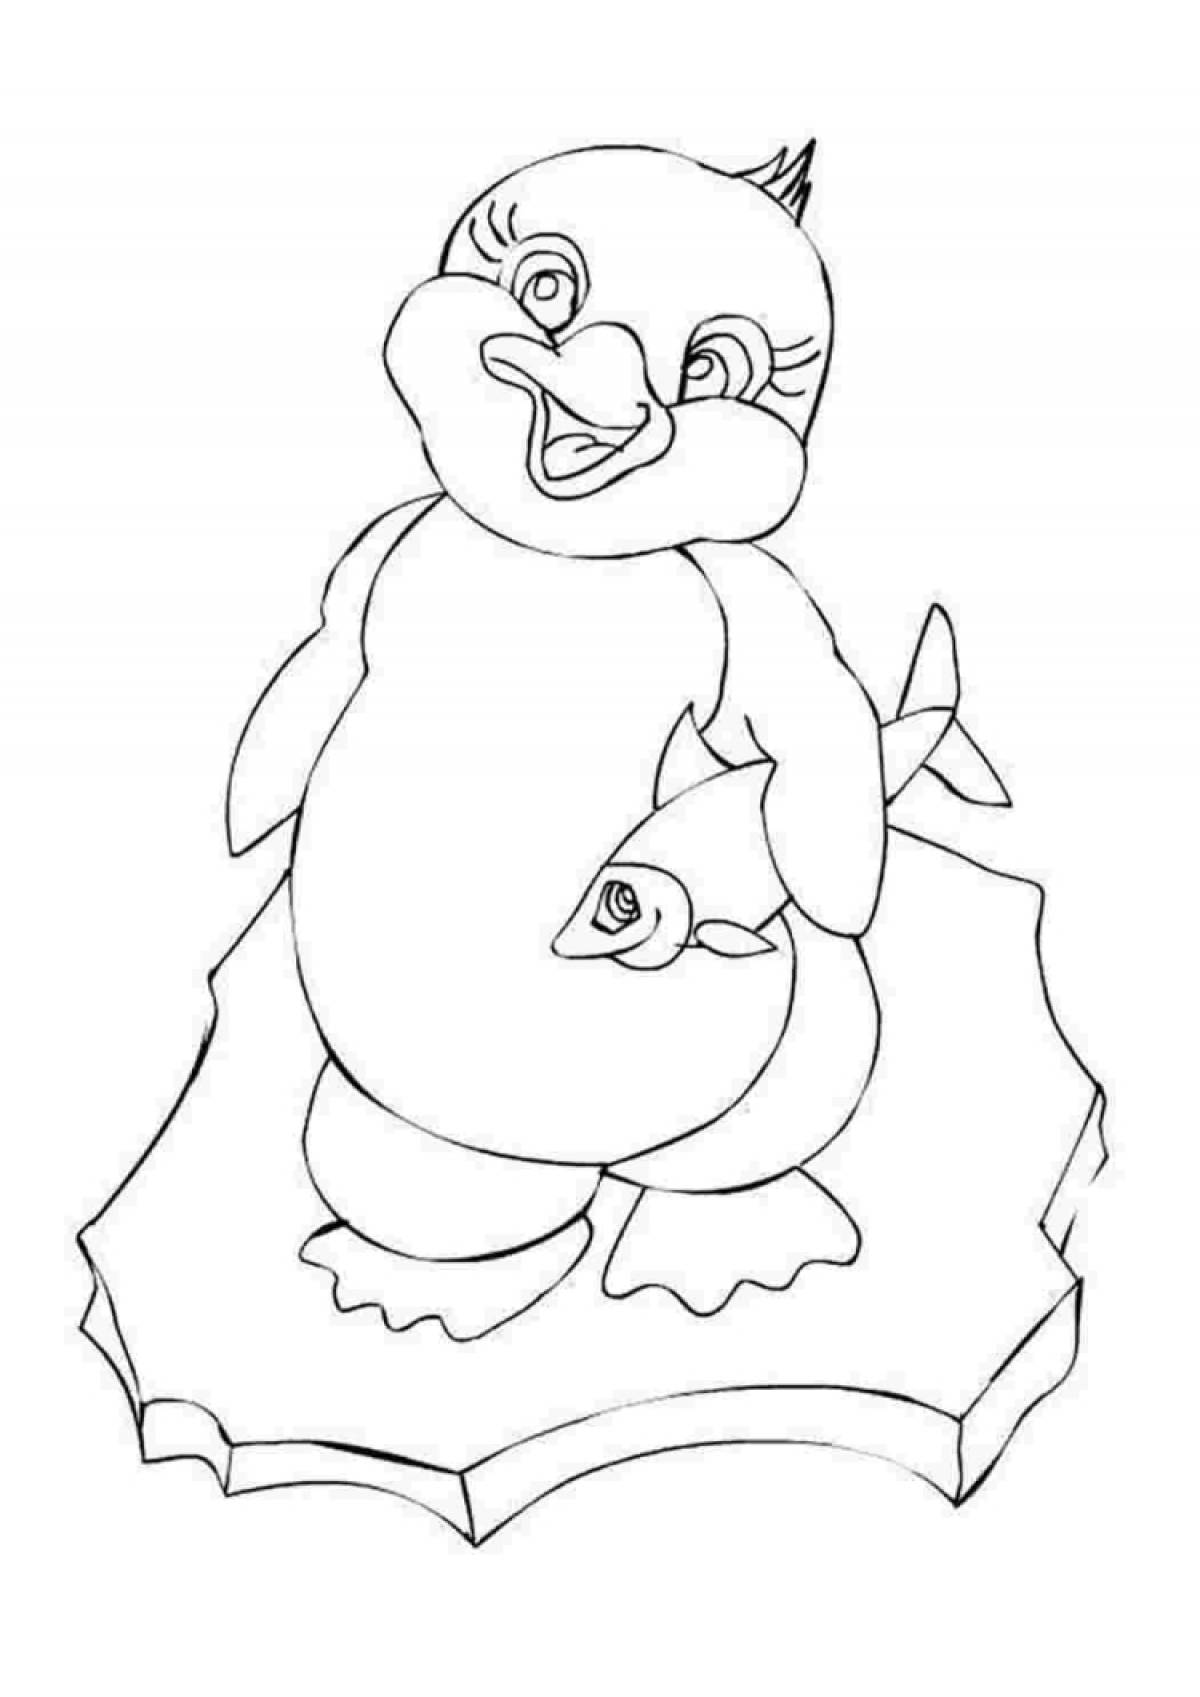 Dazzling penguin on an ice floe coloring pages for kids